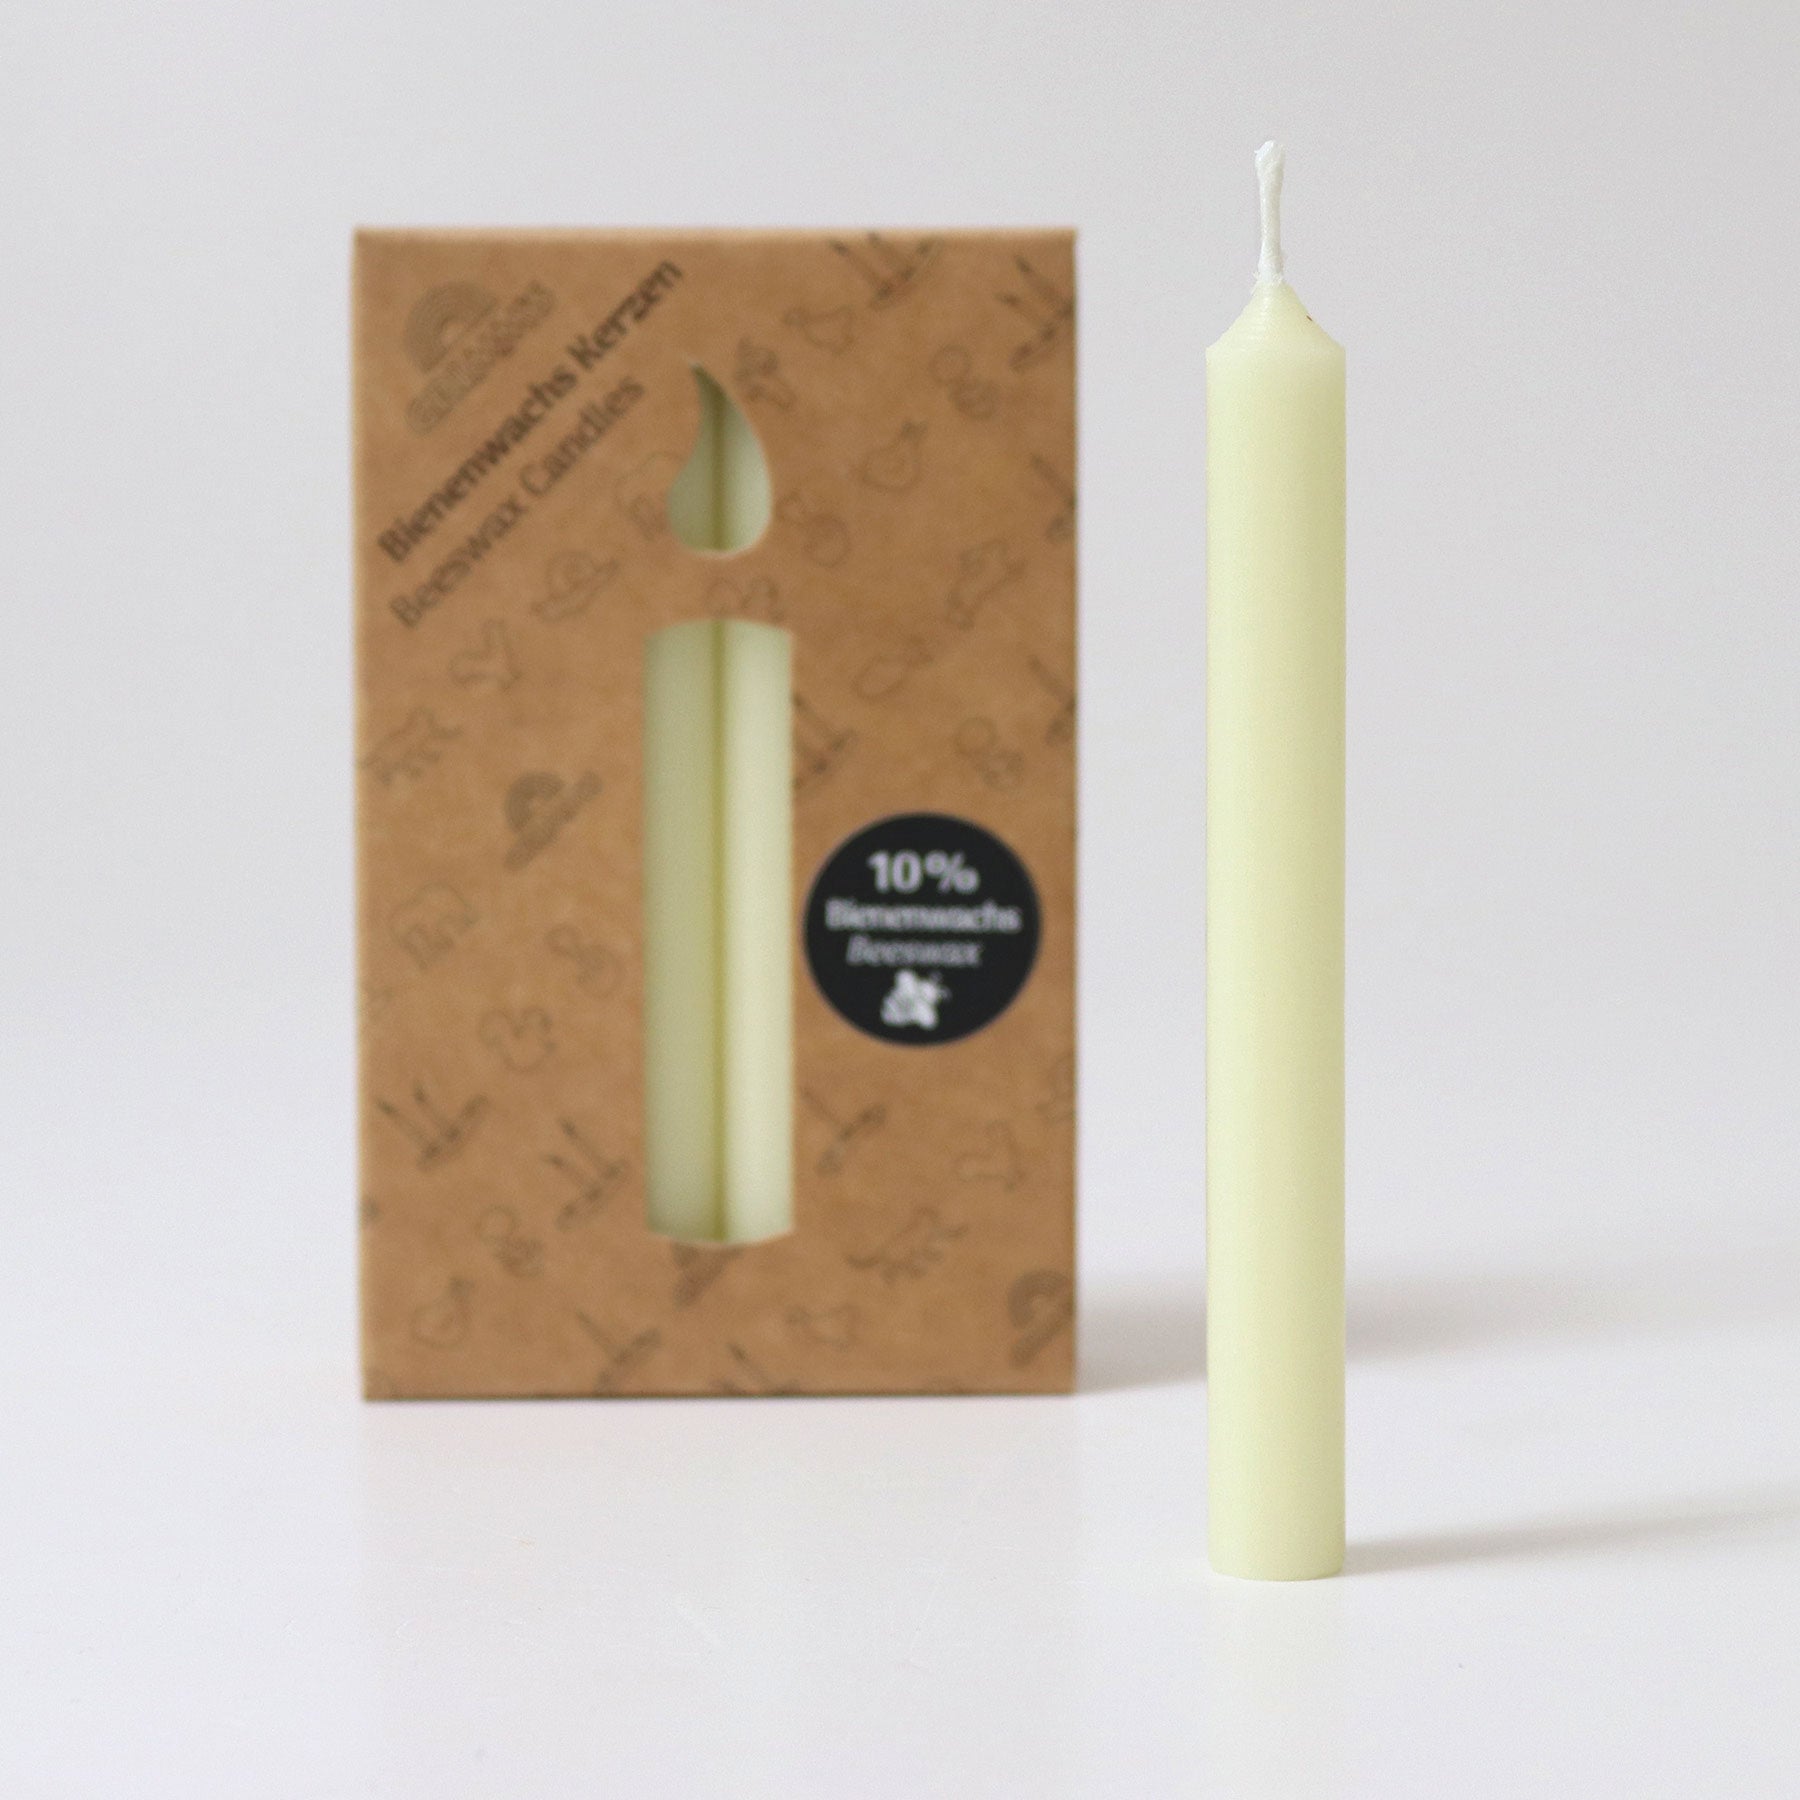 Creme Beeswax Candles (100%) - 12 pc.